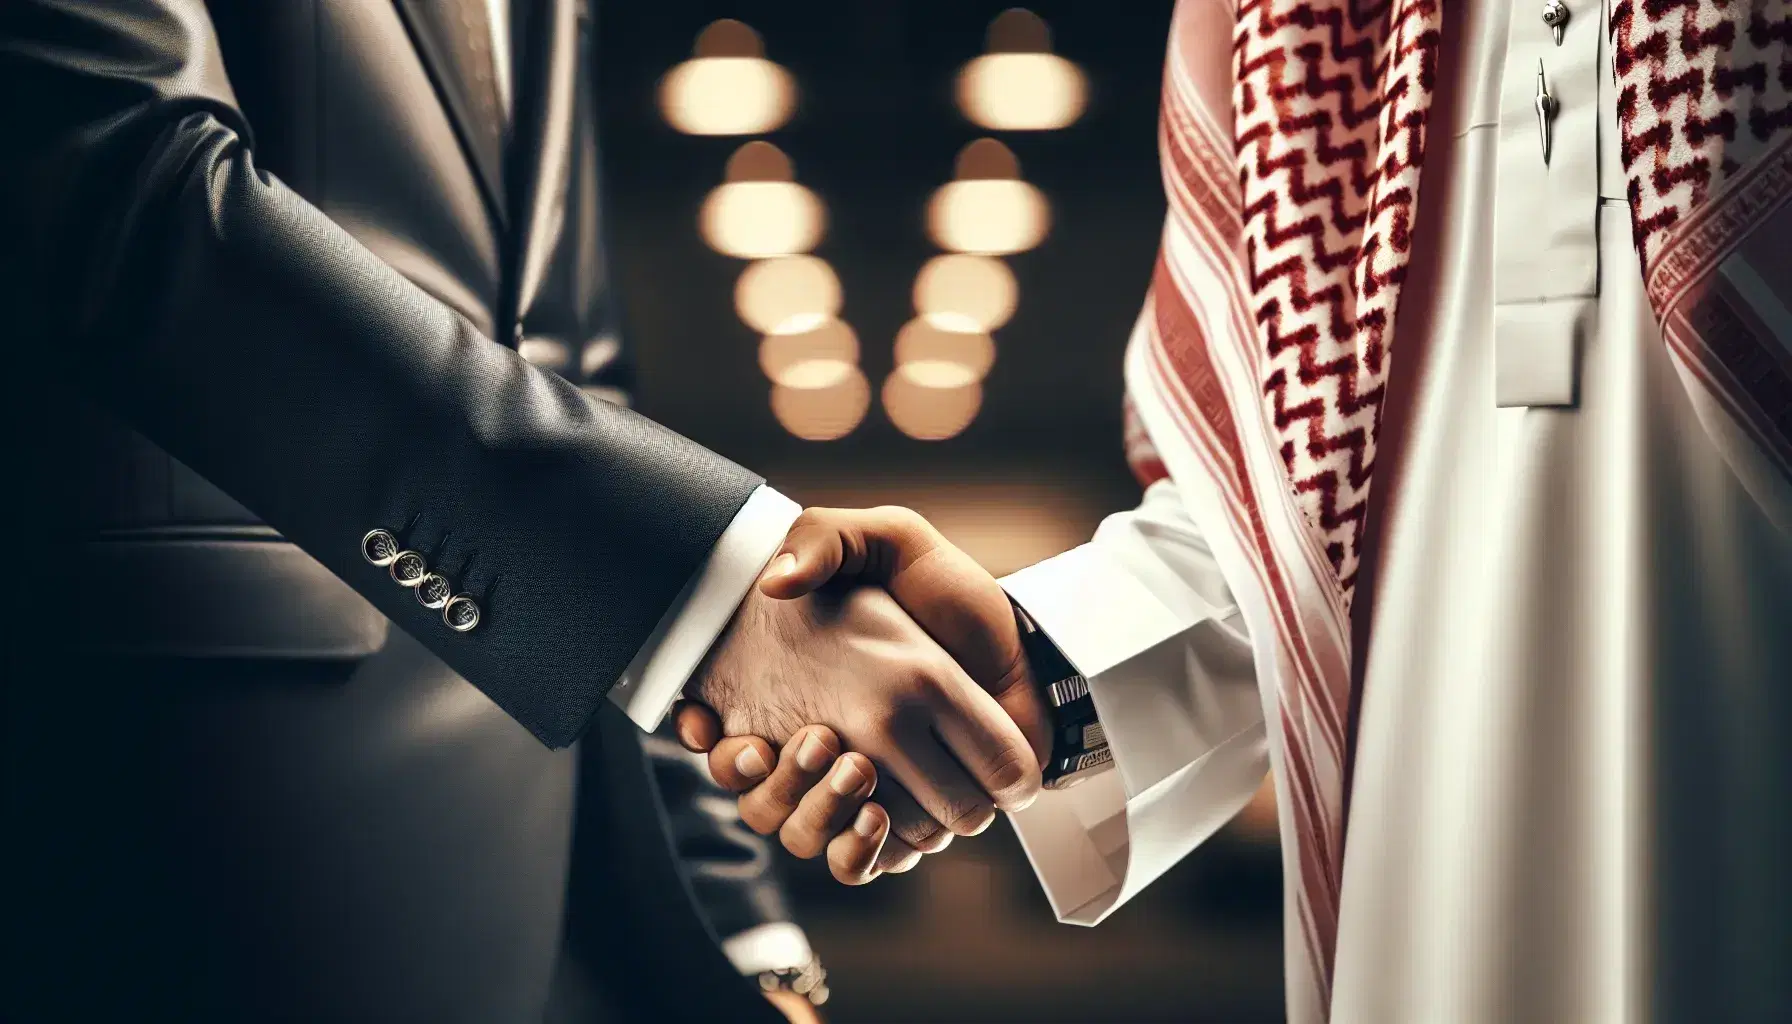 Handshake between a person in a Western business suit and another in a Saudi thobe and shemagh, symbolizing cross-cultural agreement.